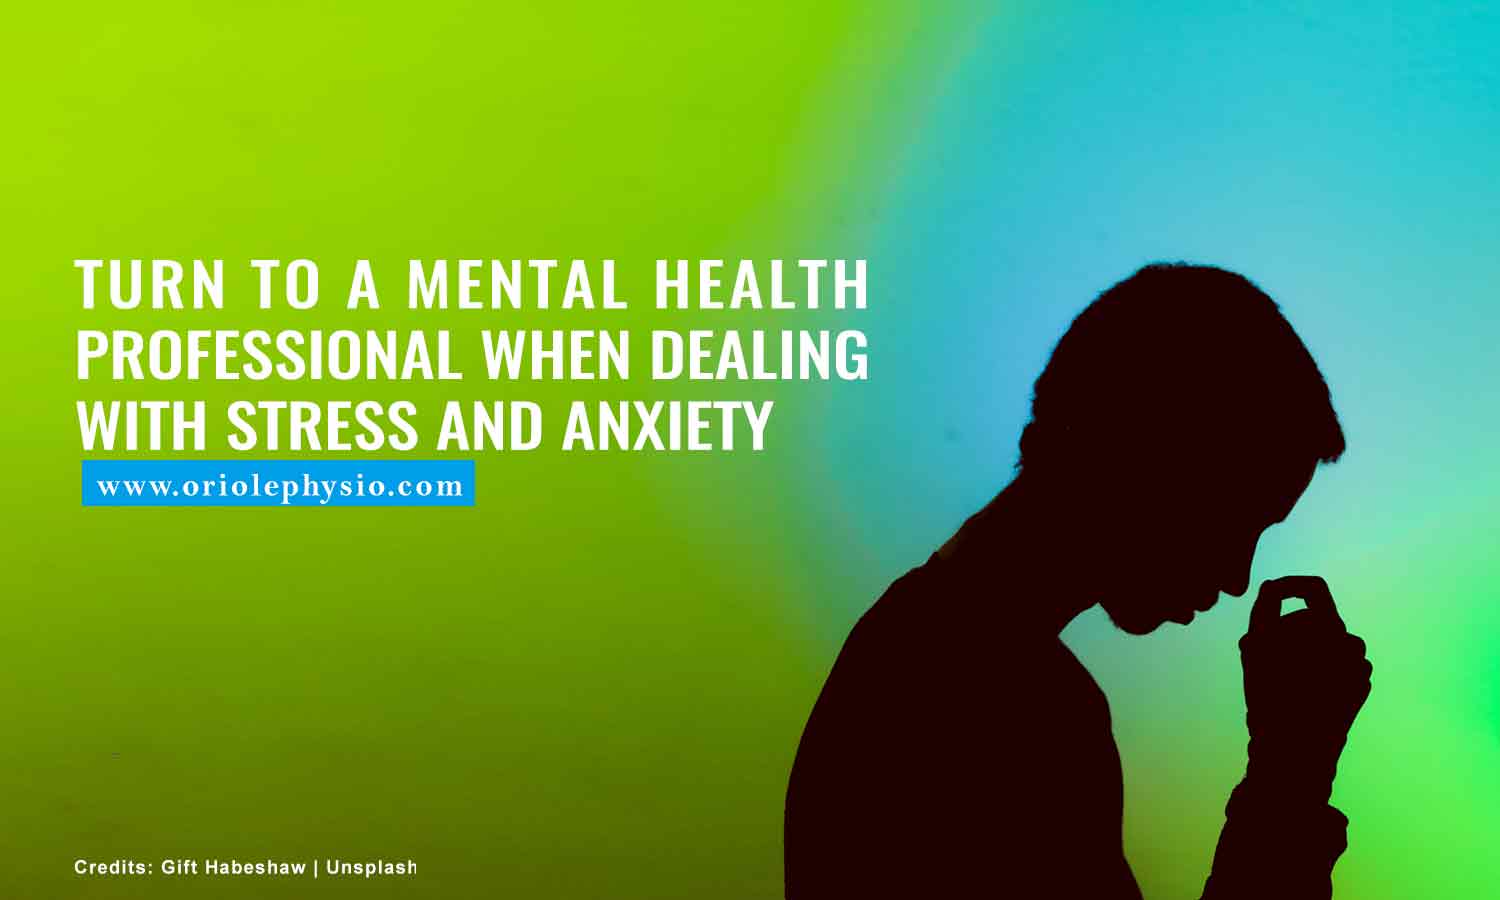 Turn to a mental health professional when dealing with stress and anxiety